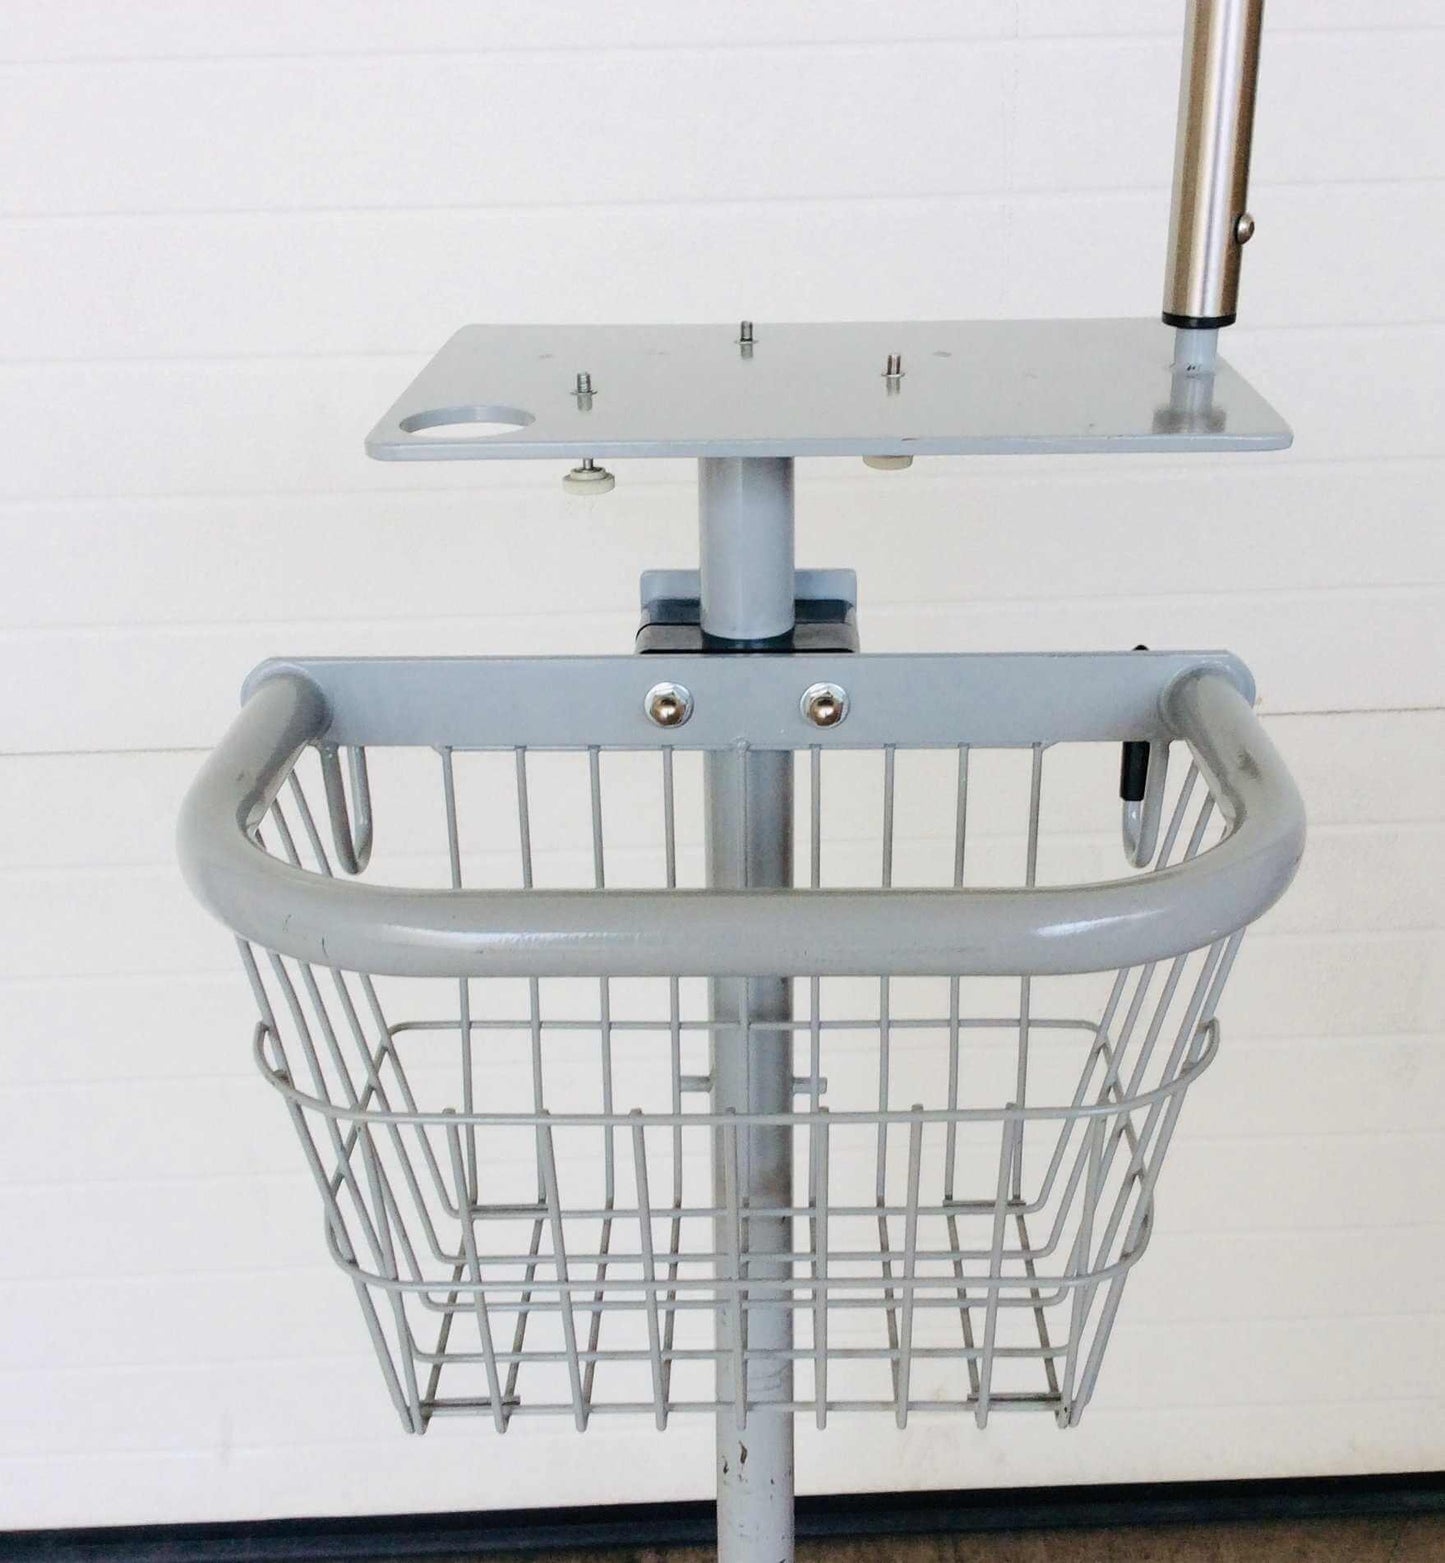 USED Viasys CareFusion Infant Flow SiPAP Rolling Stand with IV Pole and Basket 777237-102 777238 10611 Warranty FREE Shipping - MBR Medicals